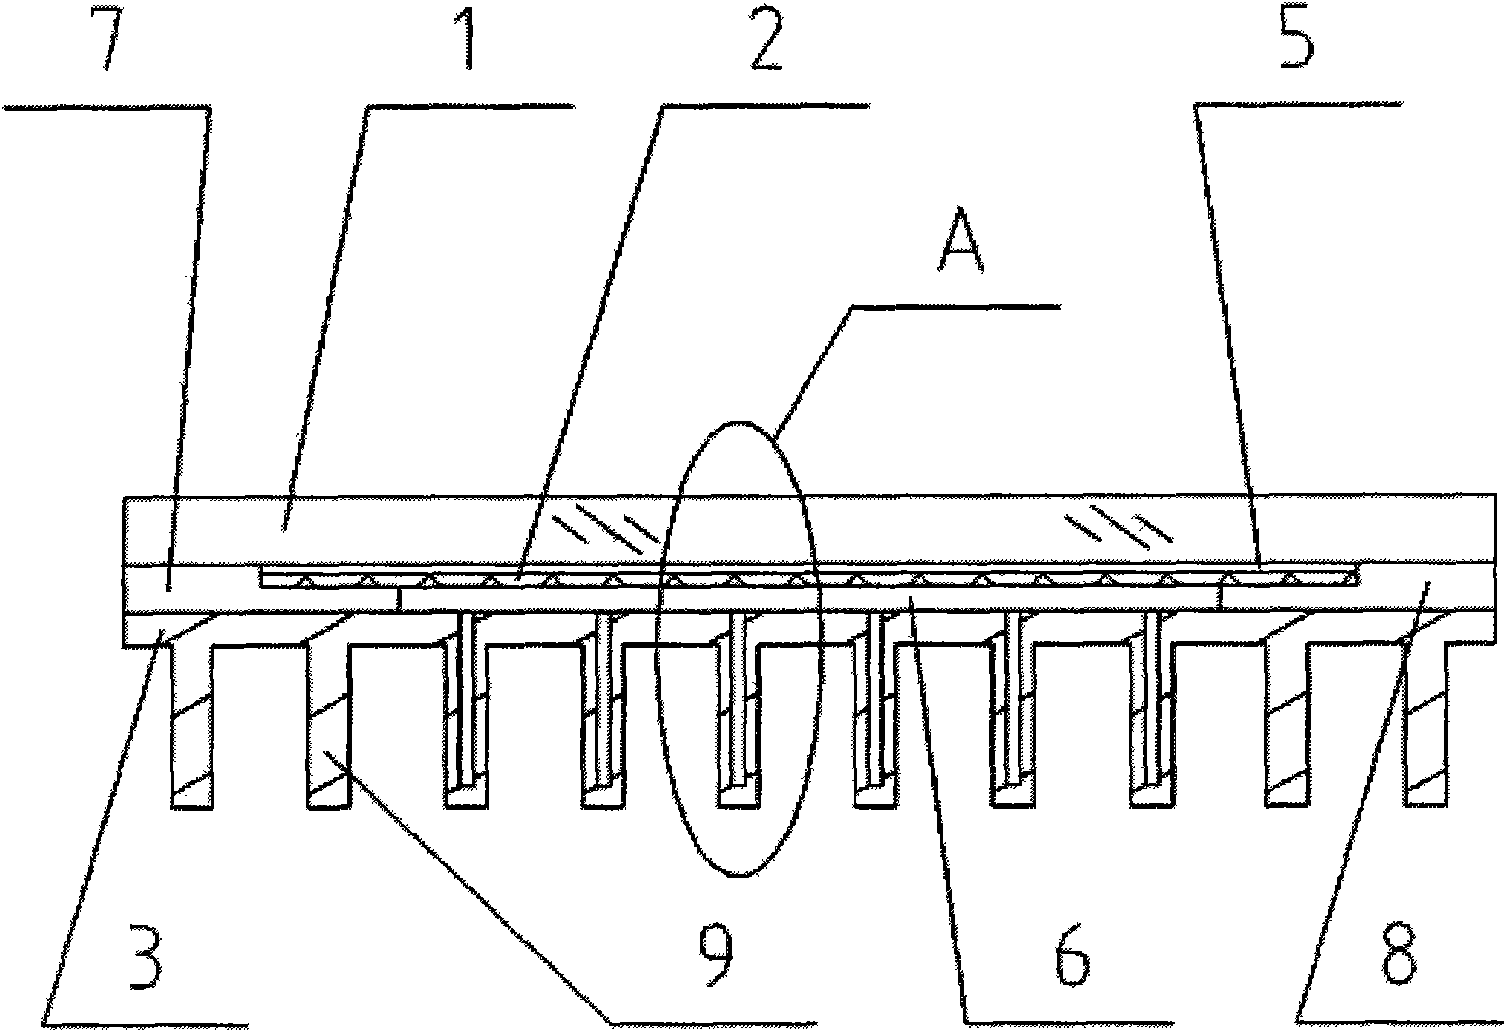 Solar photovoltaic cell with micro-fluidic structure